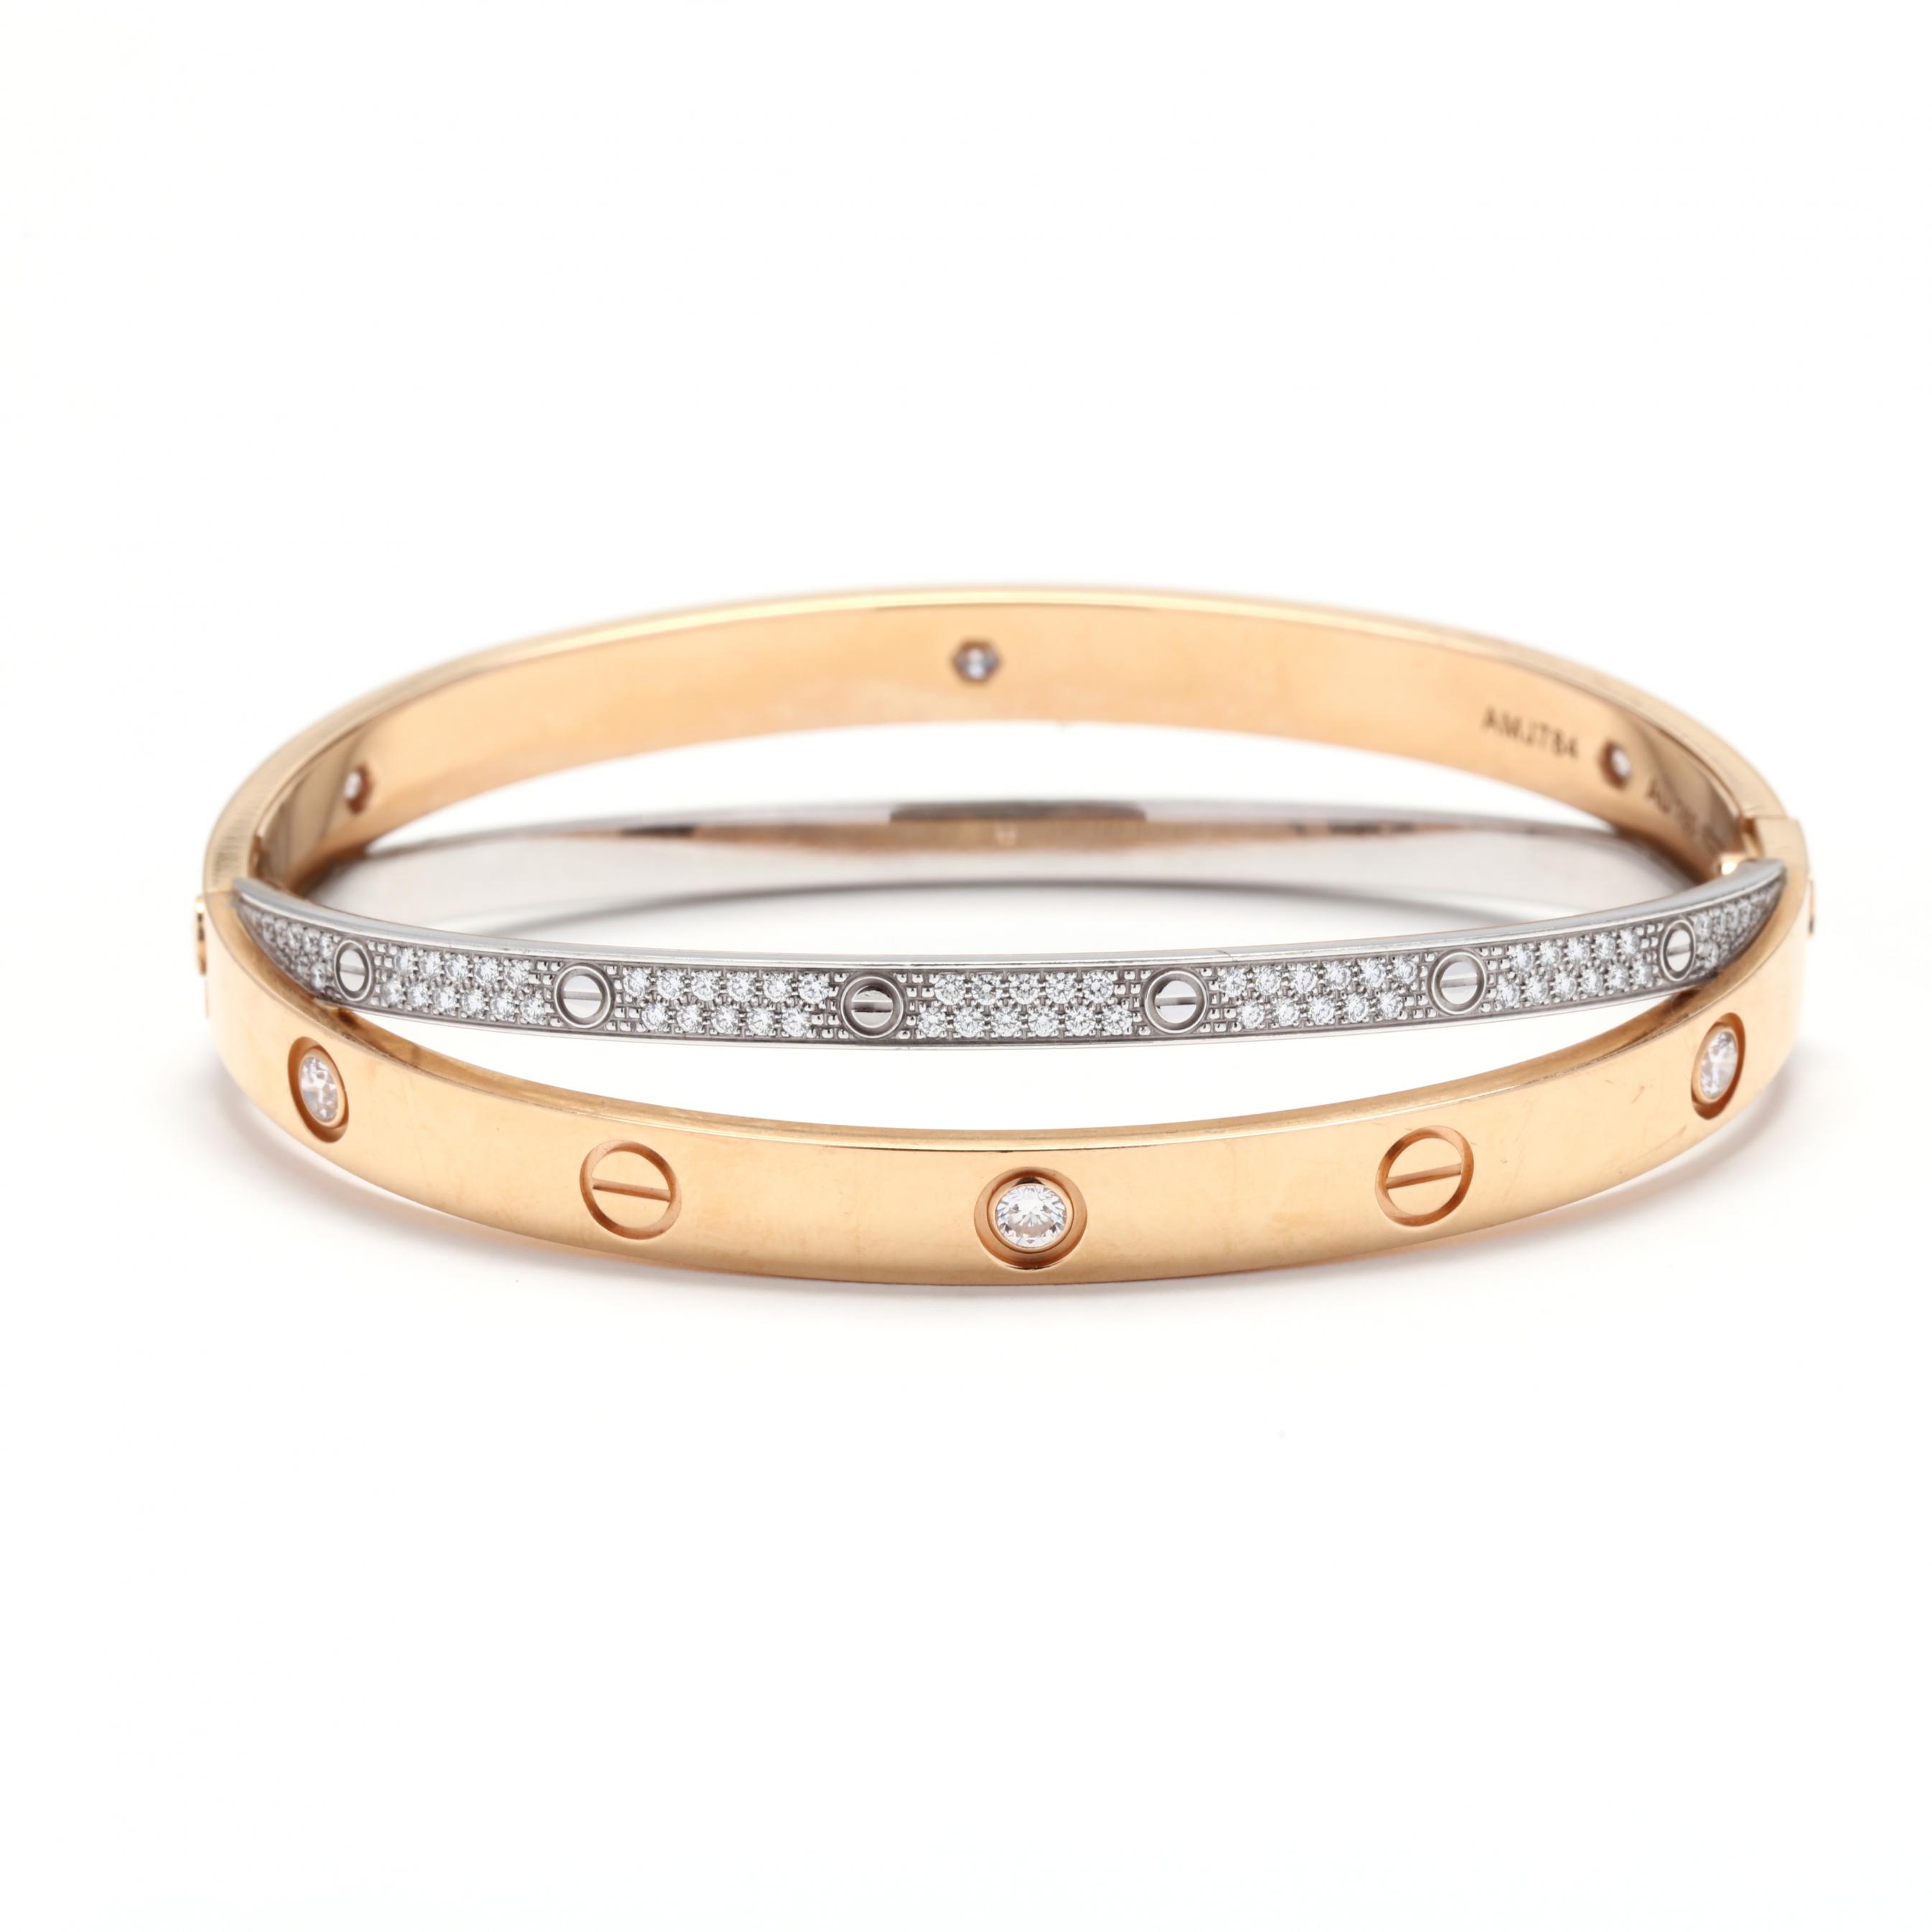 Devyani Bangles - These stunning Gold Love Bracelets by Cartier are sure  to take your breath away! These unisex bracelets comes in 3 Colors, sure to  bind you in love! ❤️😍 @cartier